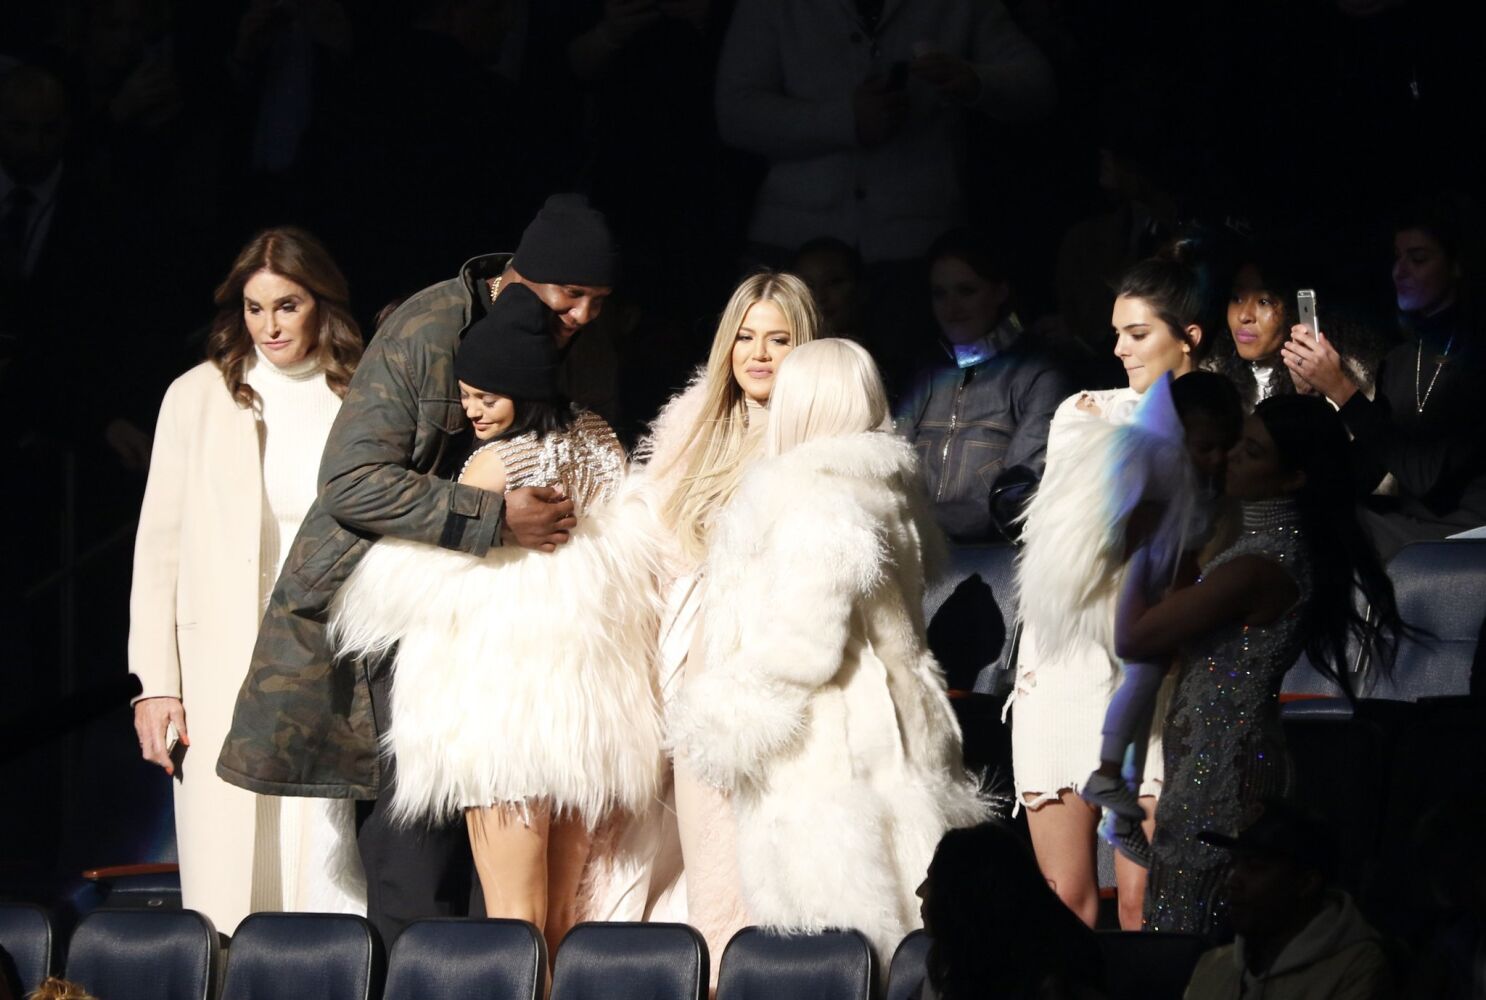 Yeezy Season 3: Kardashians and NYFW for Kanye West's new collection and album Los Angeles Times